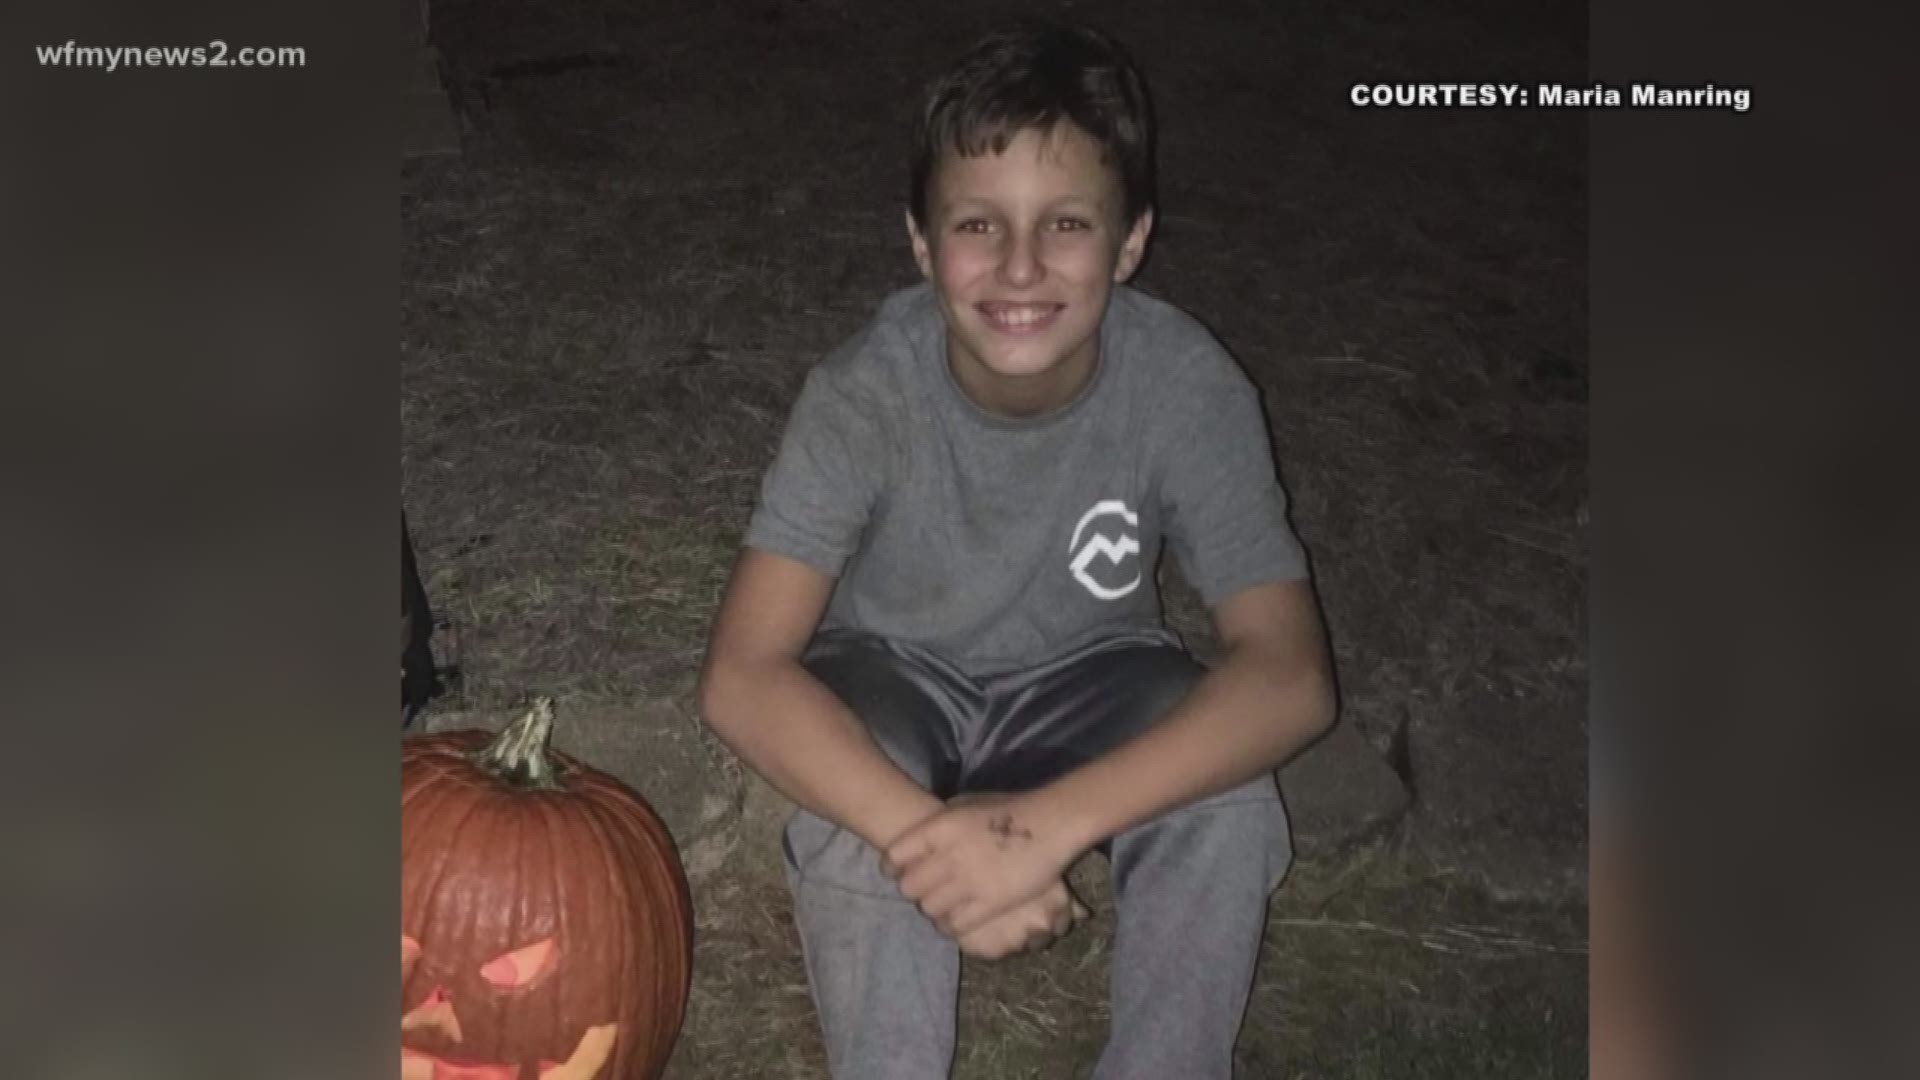 Their funny, strong, energetic boy died while trick-or-treating, but they say he will help save other young lives.